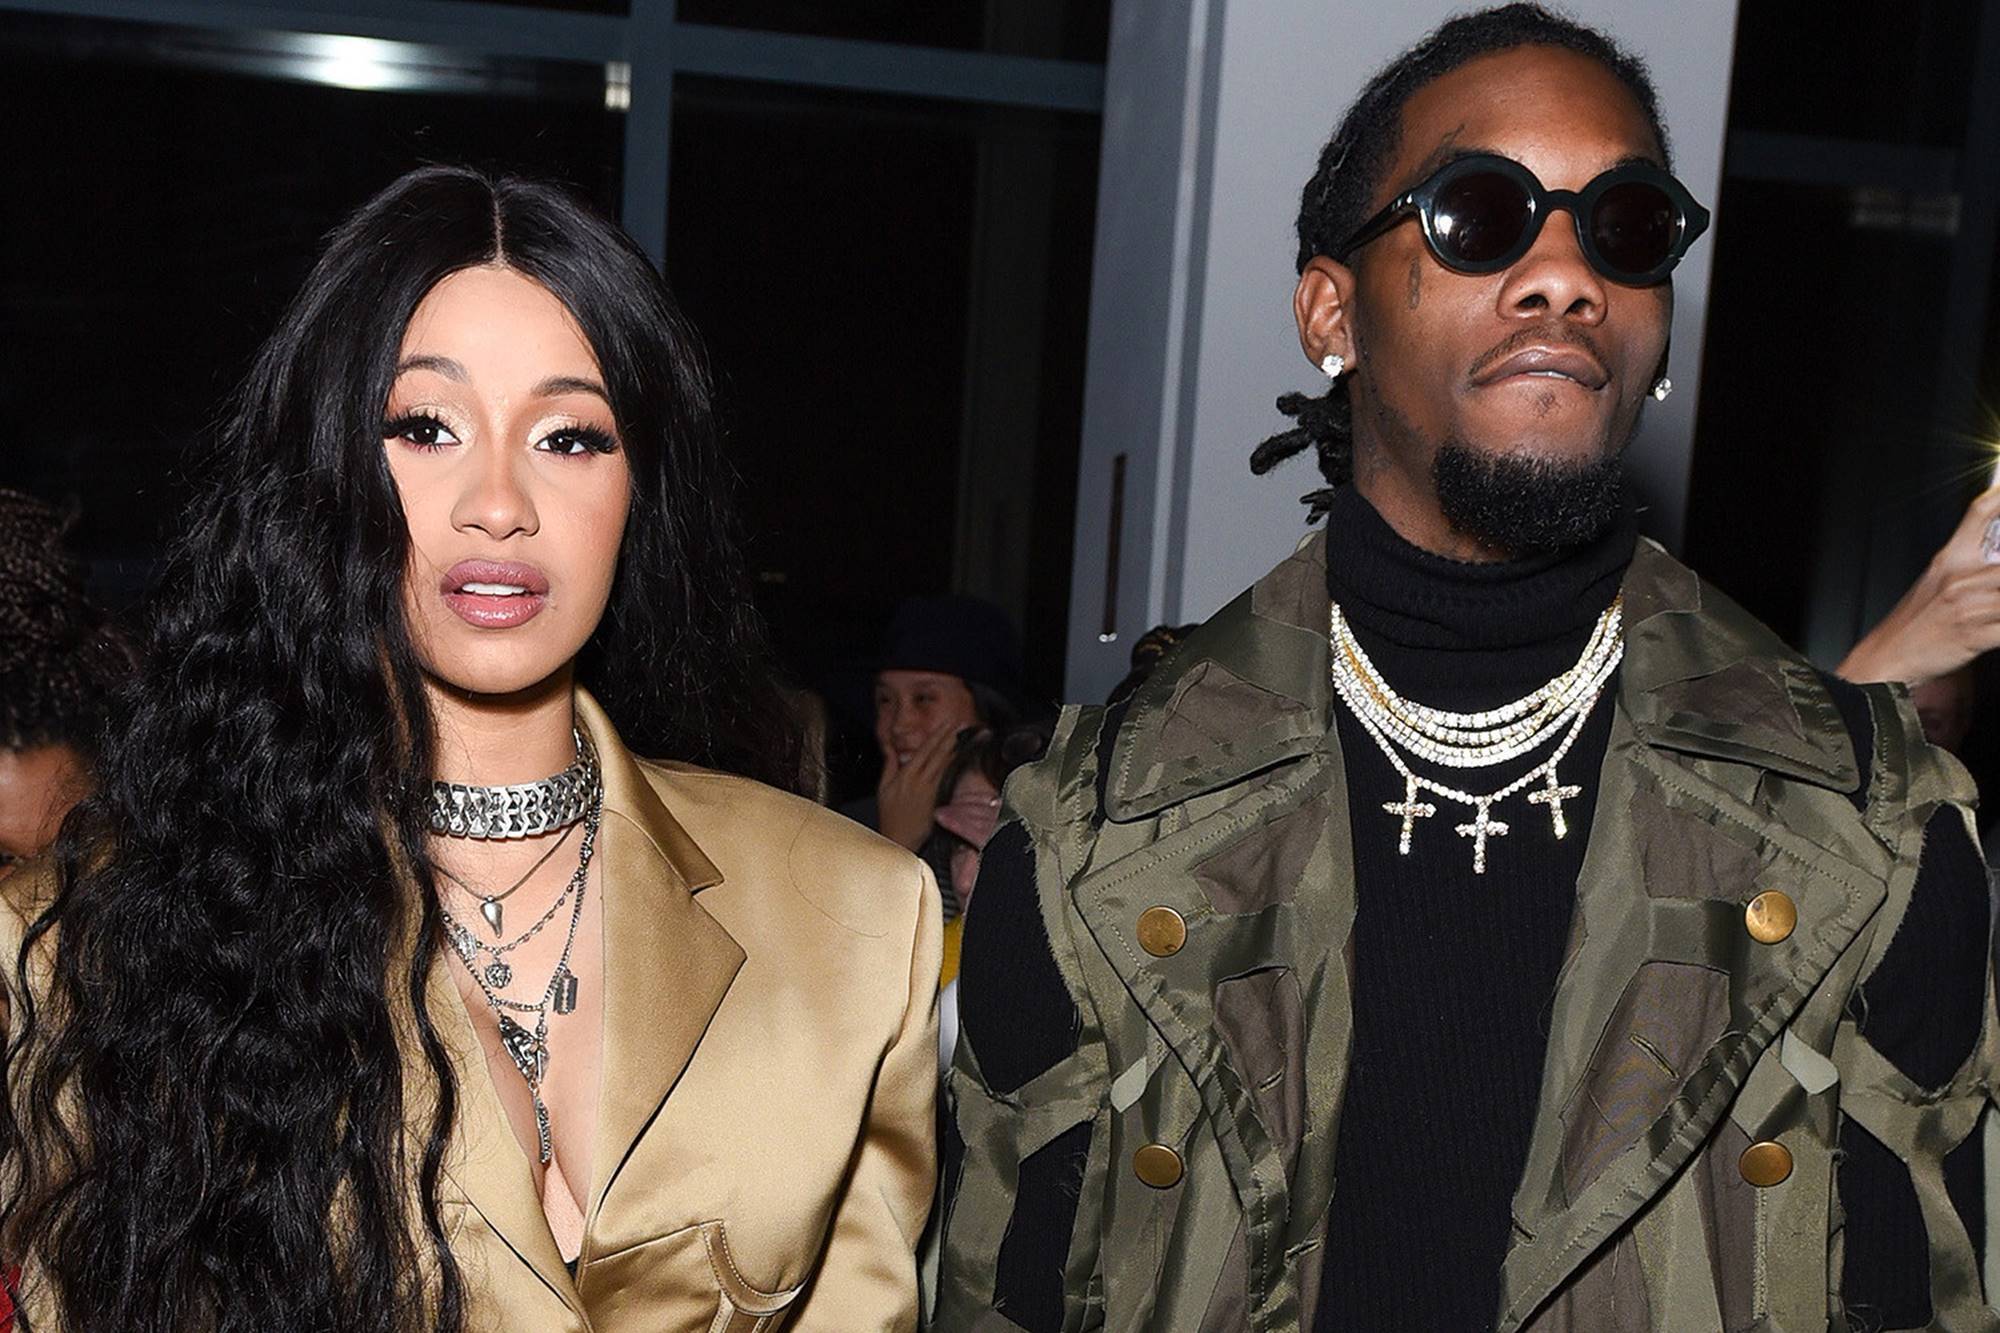 Cardi B Files For Divorce From Offset After 3 Years of Marriage, Amid New Infidelity Rumors